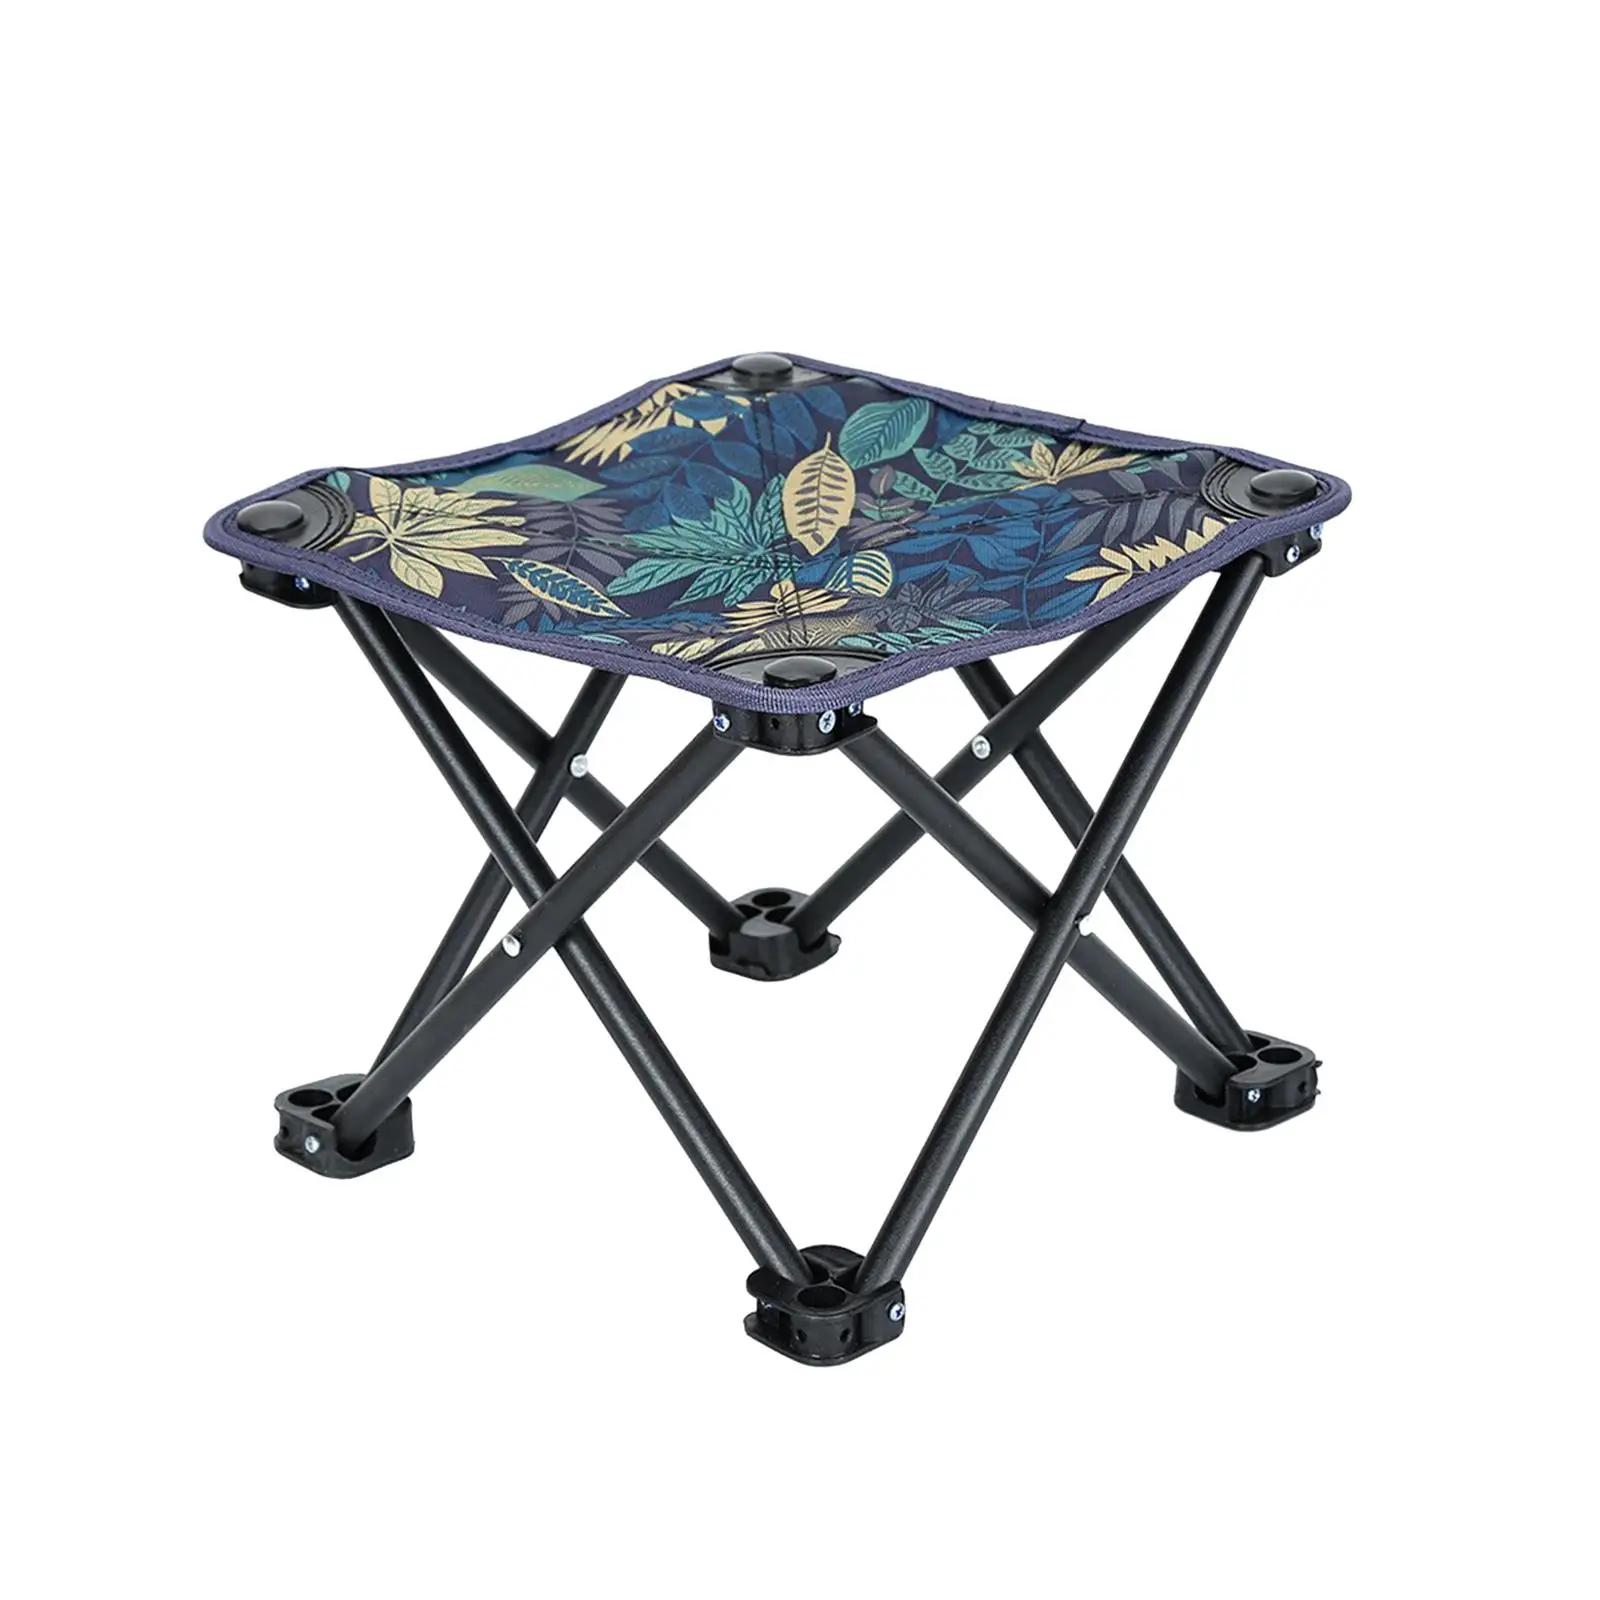 Camping Stool Practical Heavy Duty Folded Wear Resistant Folding Stool Chair for - £15.57 GBP